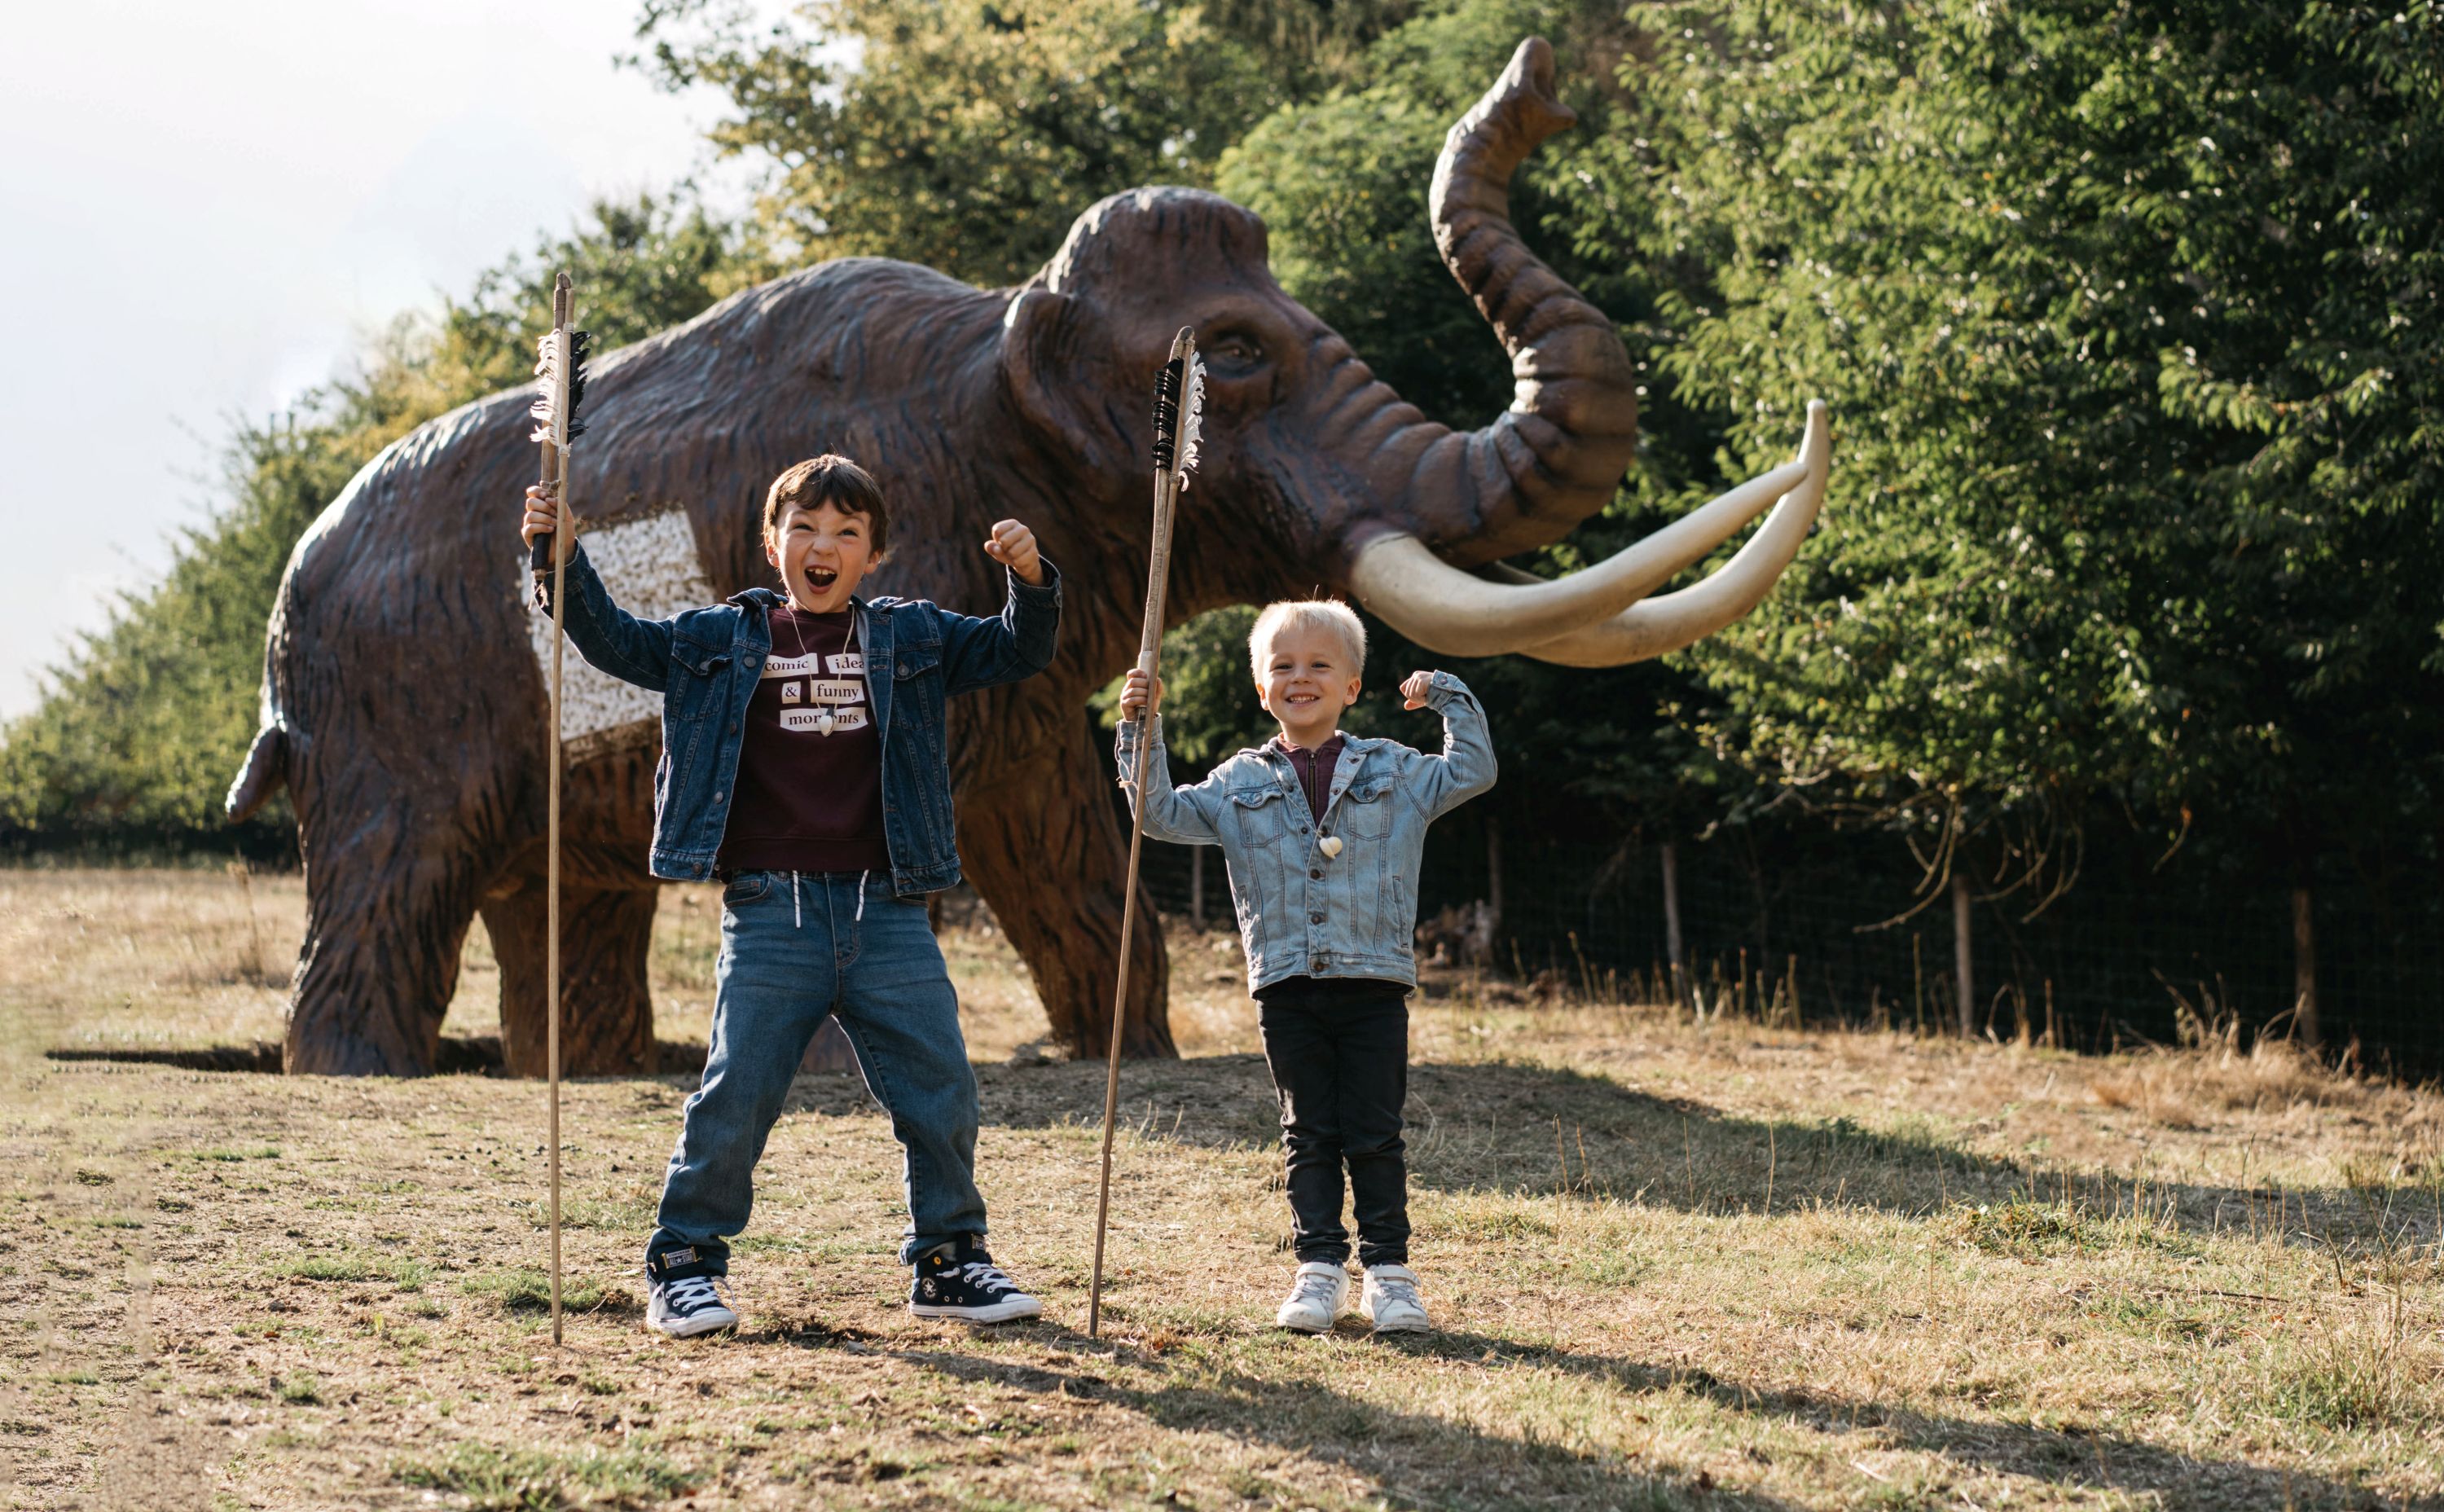 Children outdoors in front of a life-size replica of a mammoth